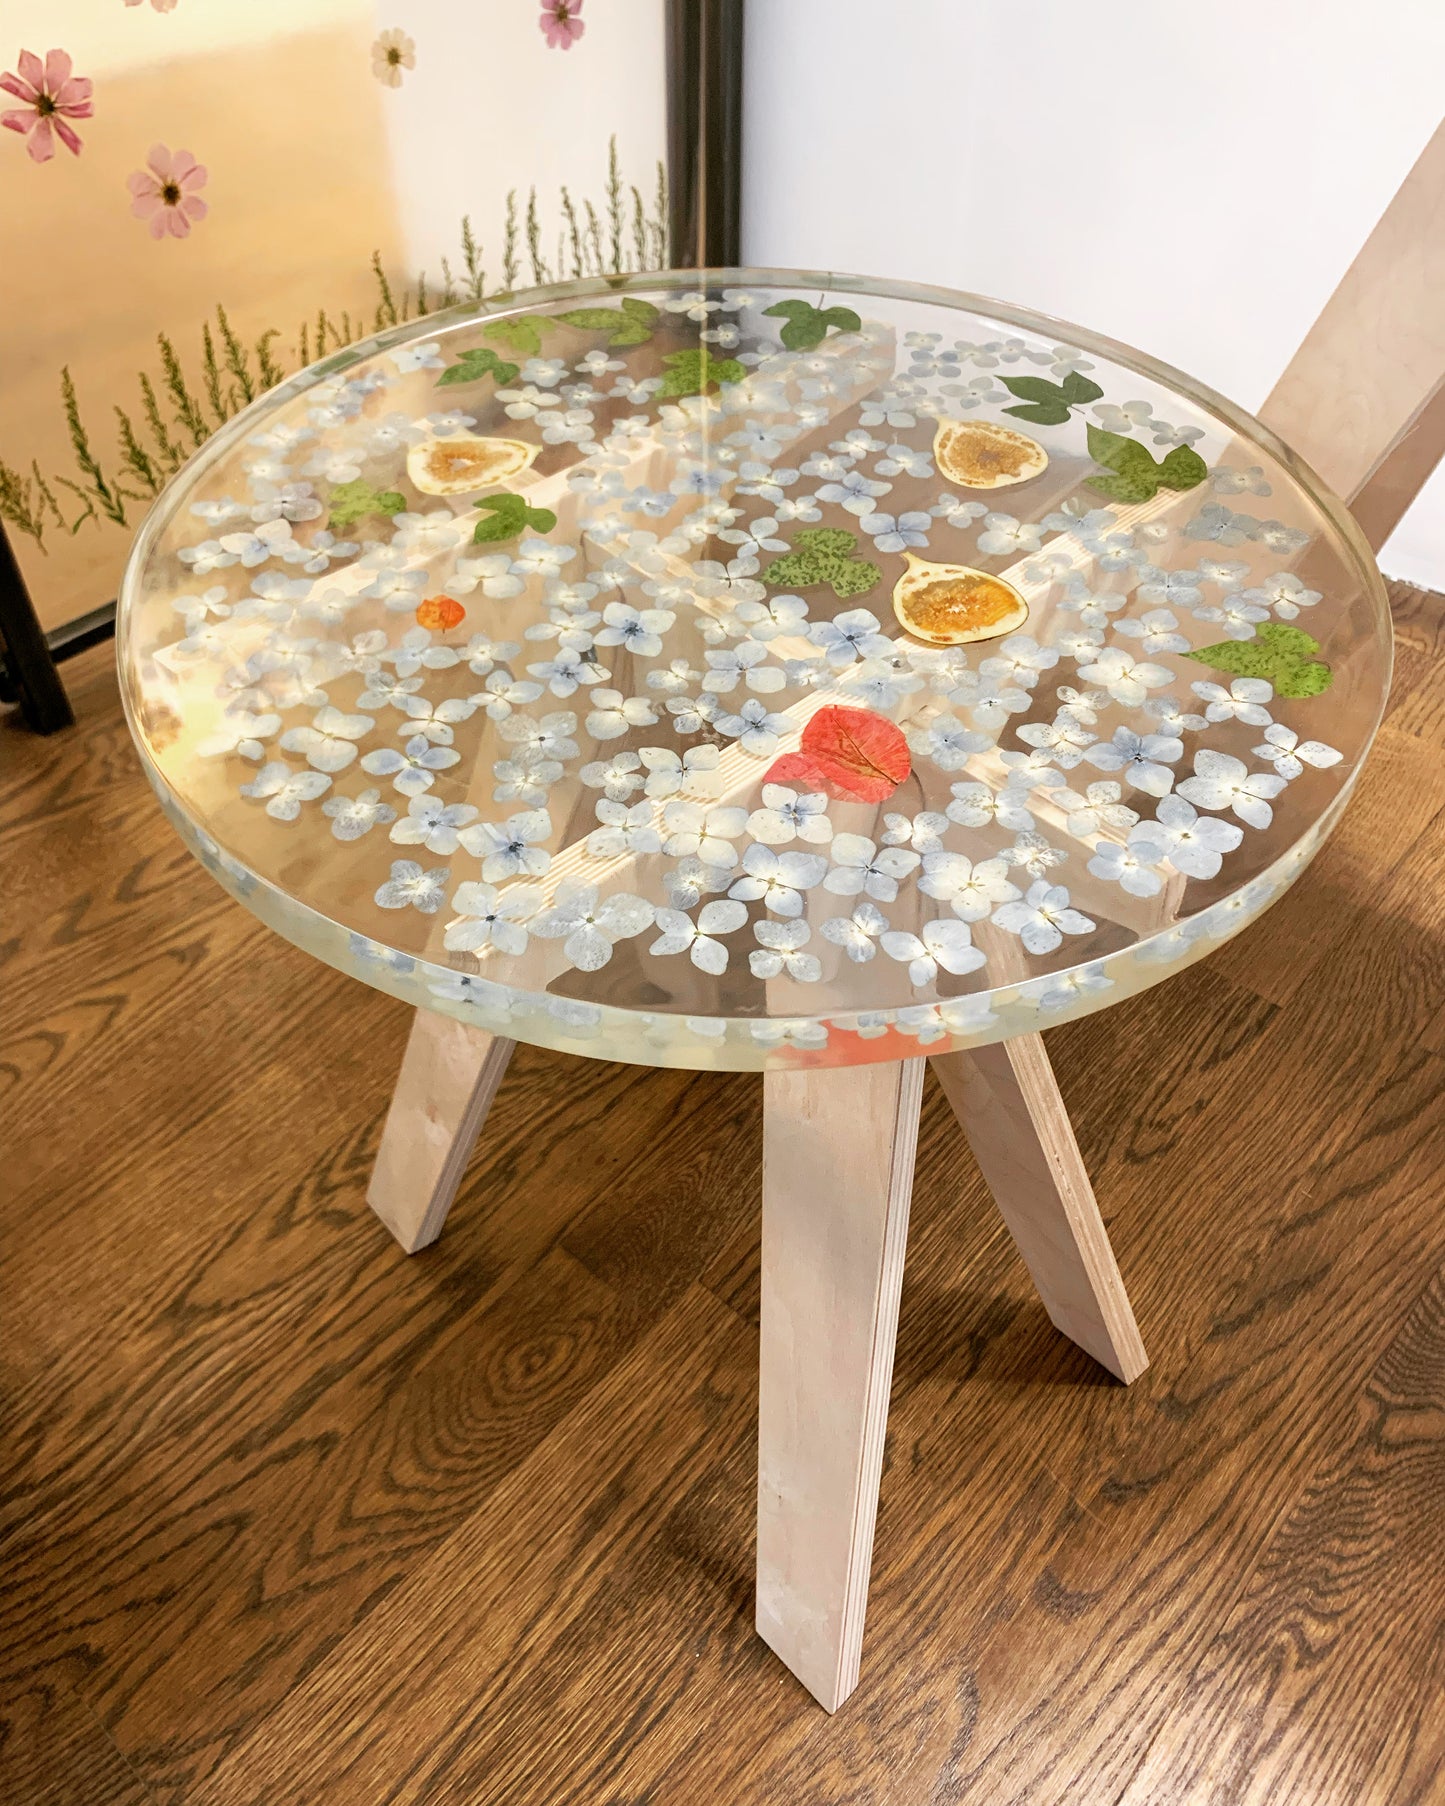 A clear round resin table top with blue hydrangeas, leaves, and figs scattered throughout. The table is held up by four light wooden legs